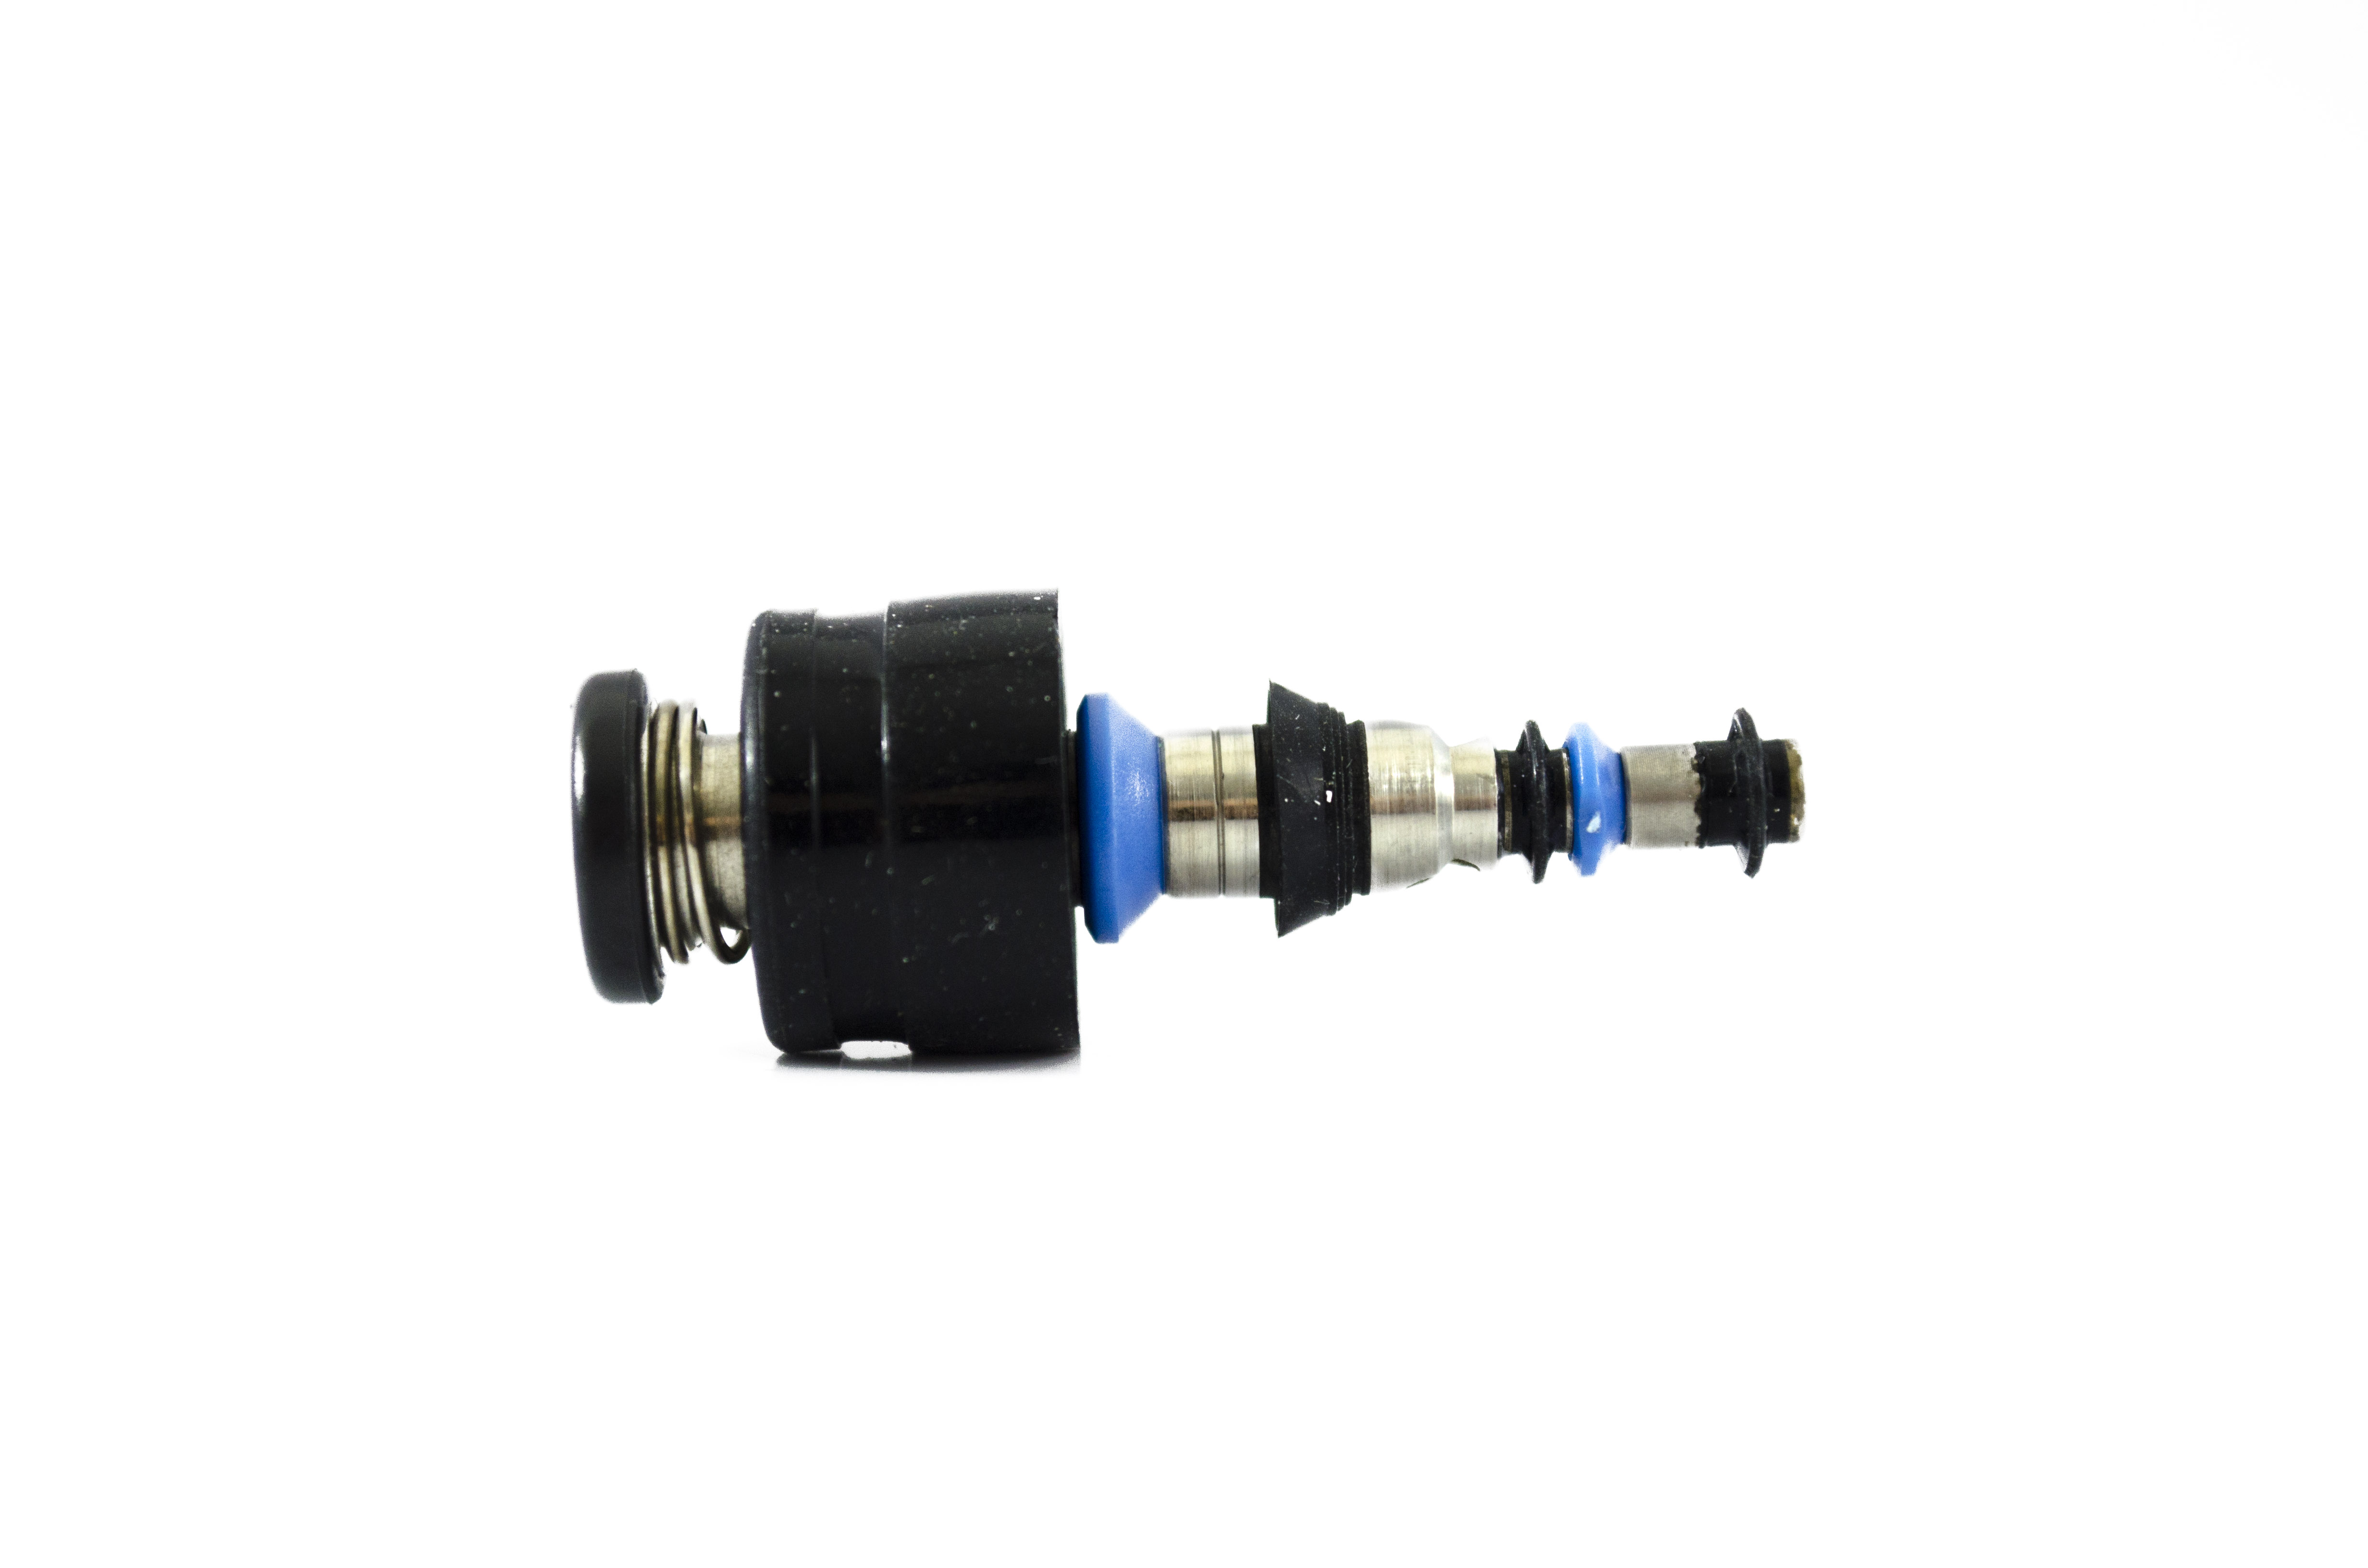 Reusable Air/Water Valve - MH-438 (Compatible): For 140, 160, 180, 190 Series